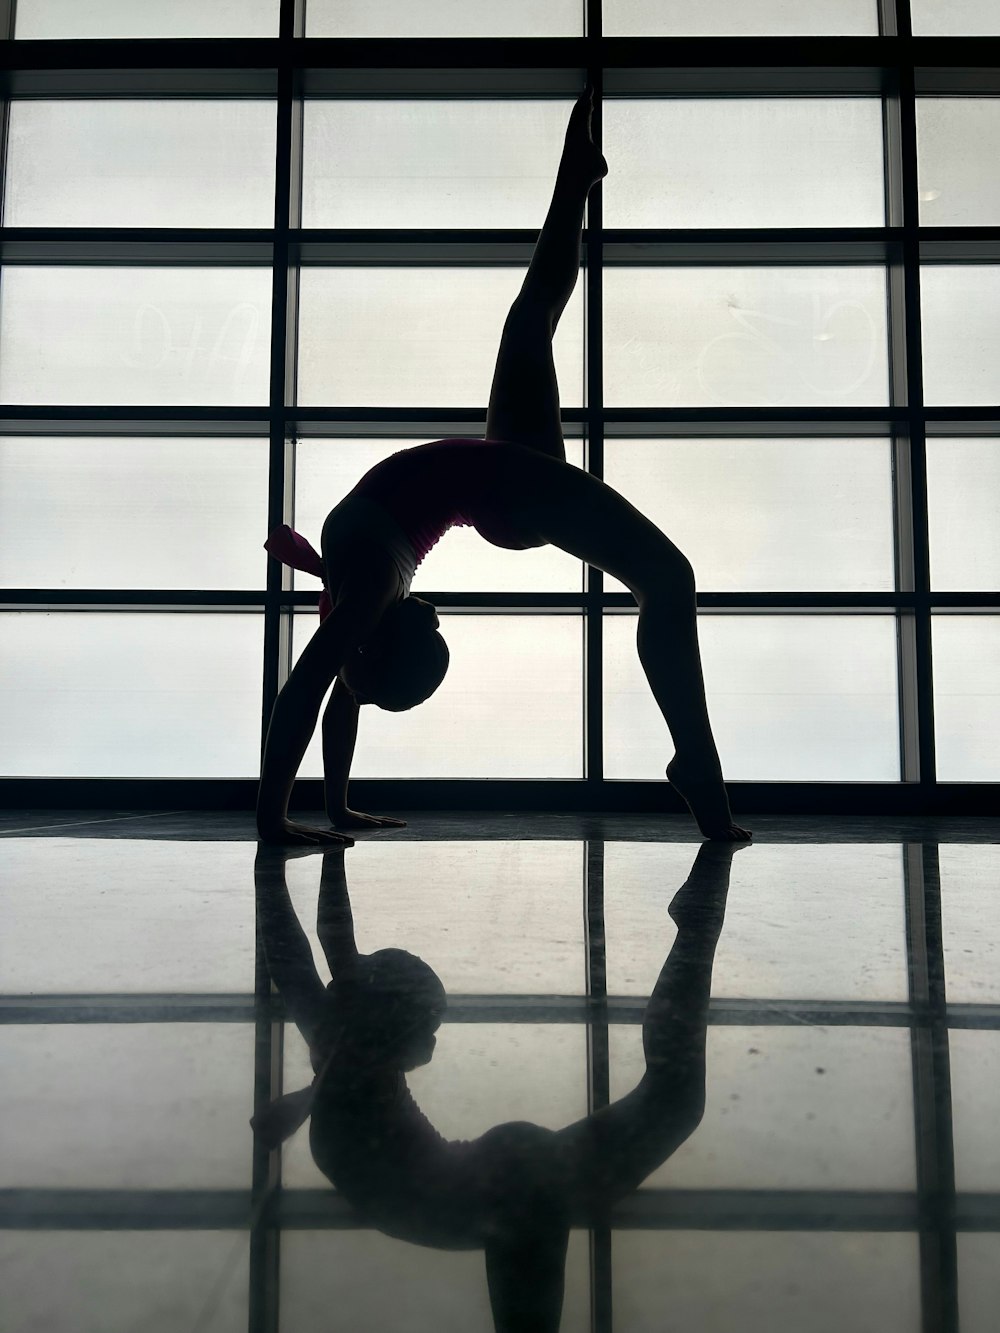 a person doing a handstand in front of a window